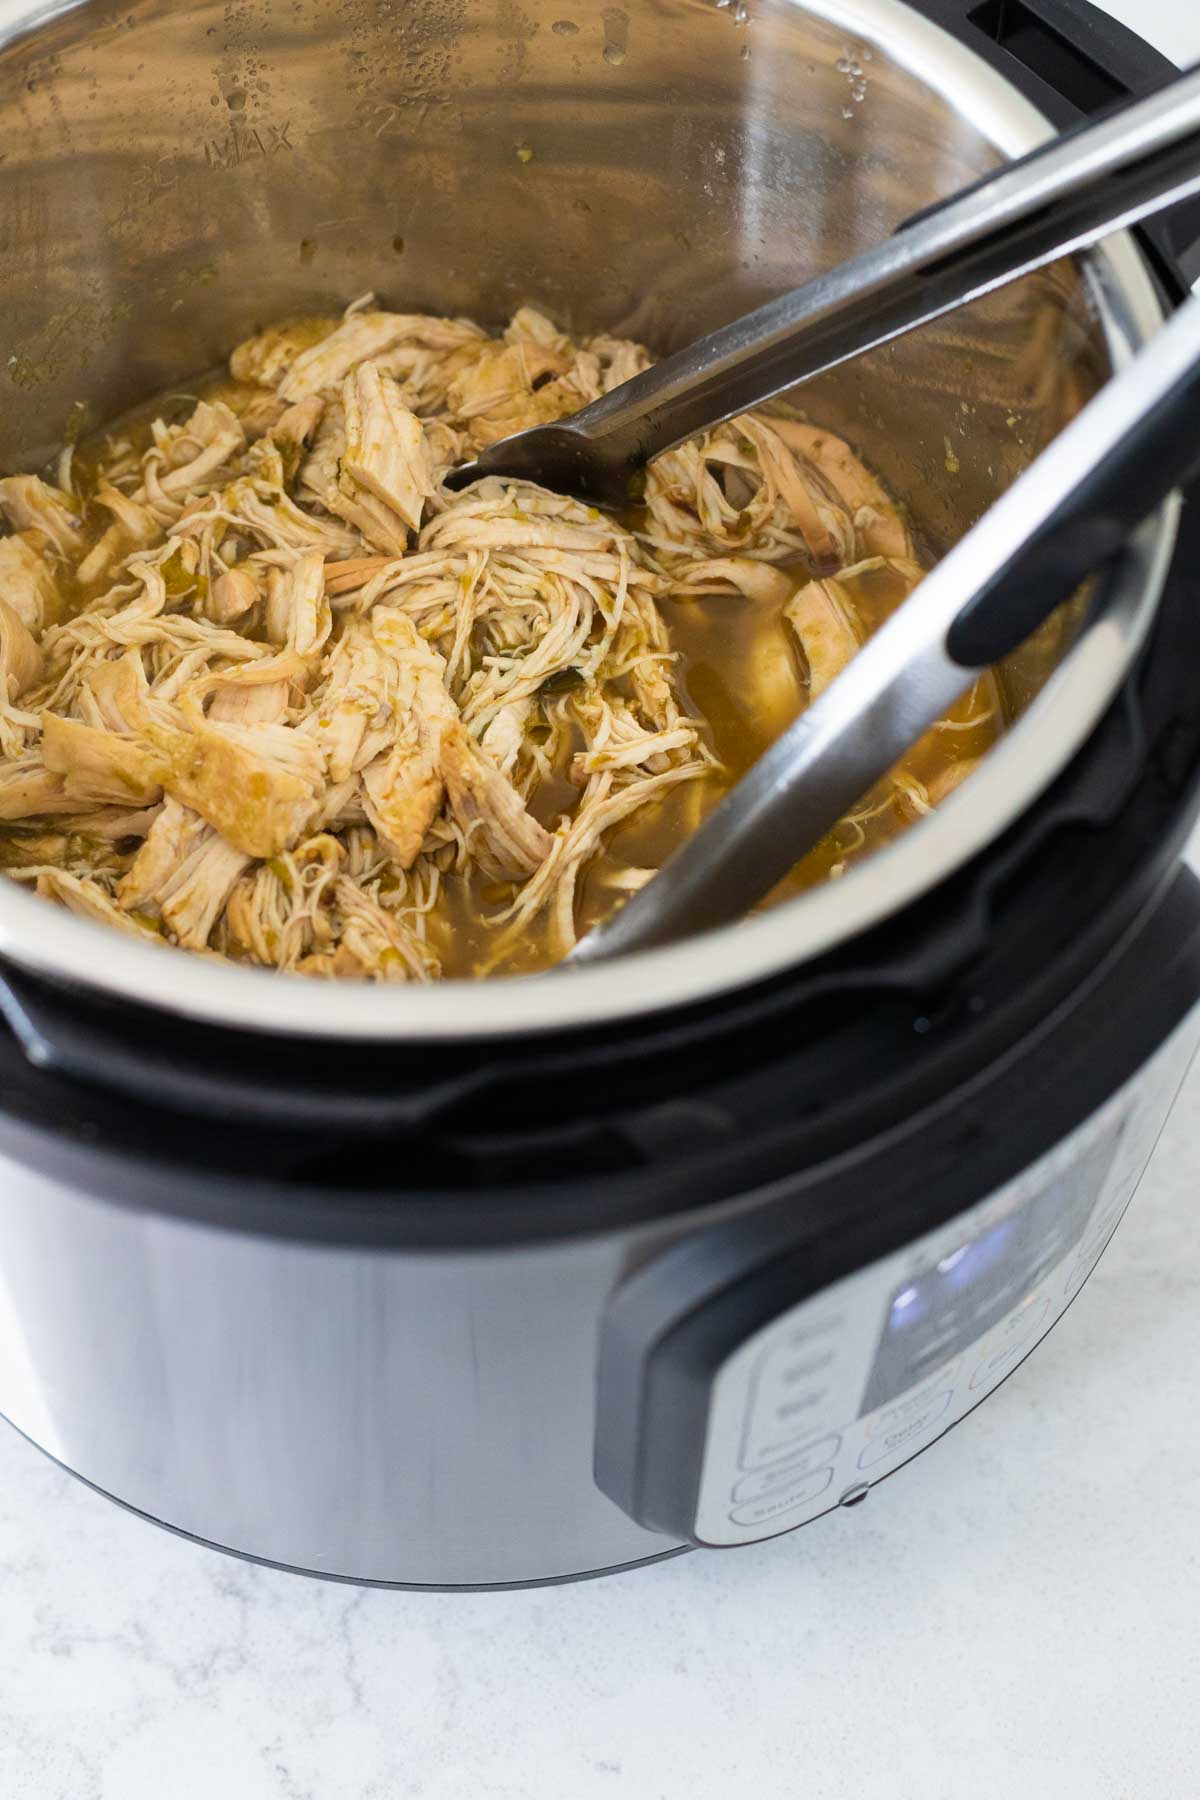 The shredded chicken is ready to be served.